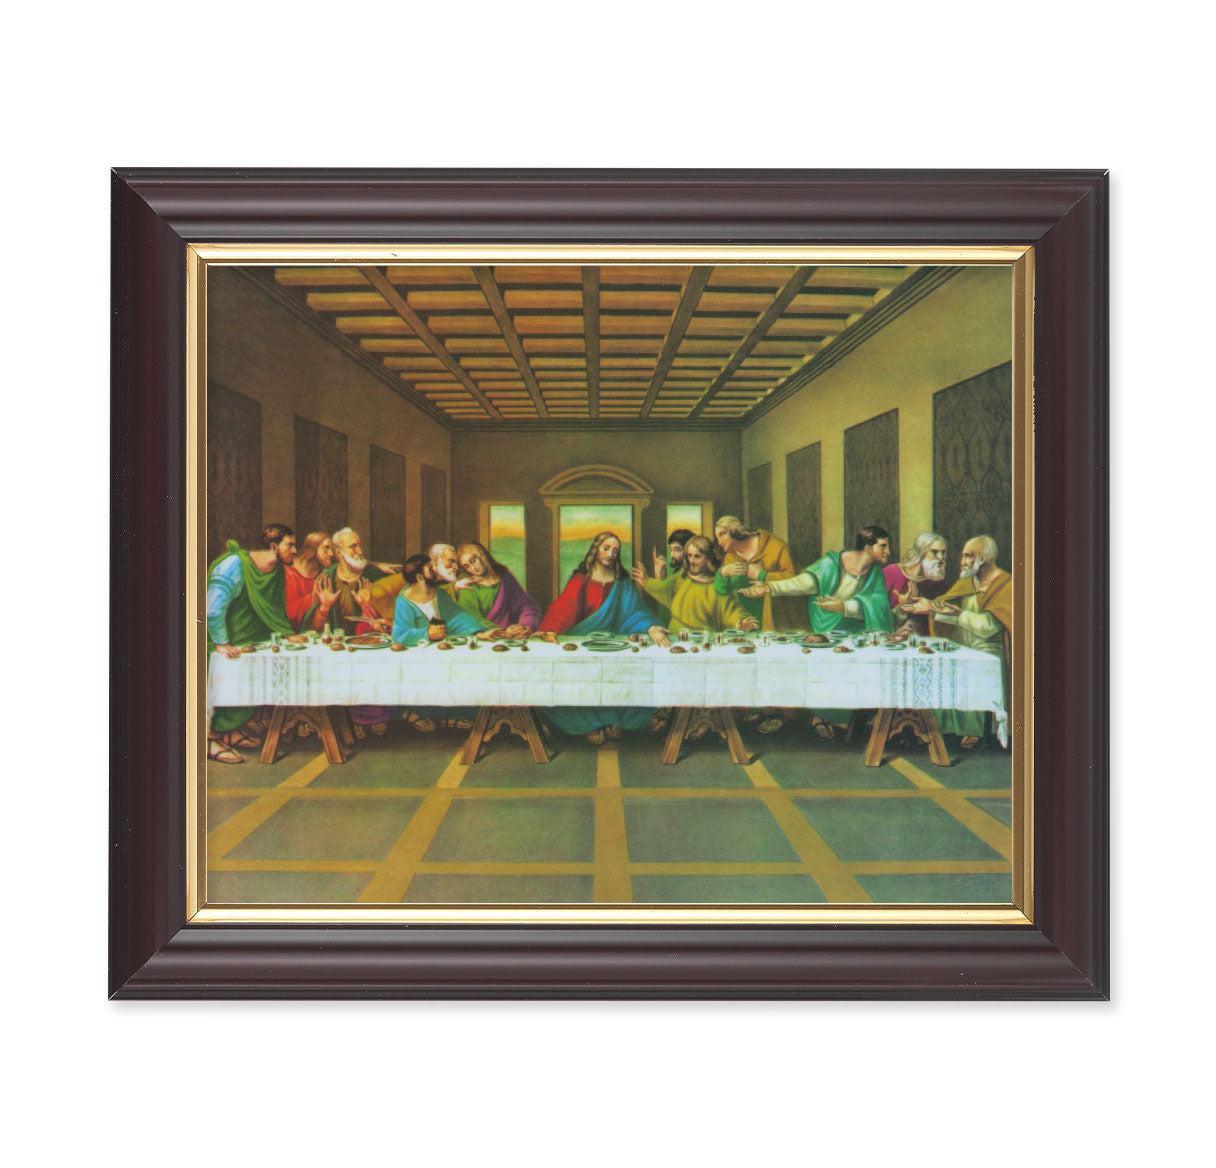 The Last Supper Picture Framed Wall Art Decor Medium, Classic Fluted Dark Walnut Finished Frame with Gold-Leaf Lip